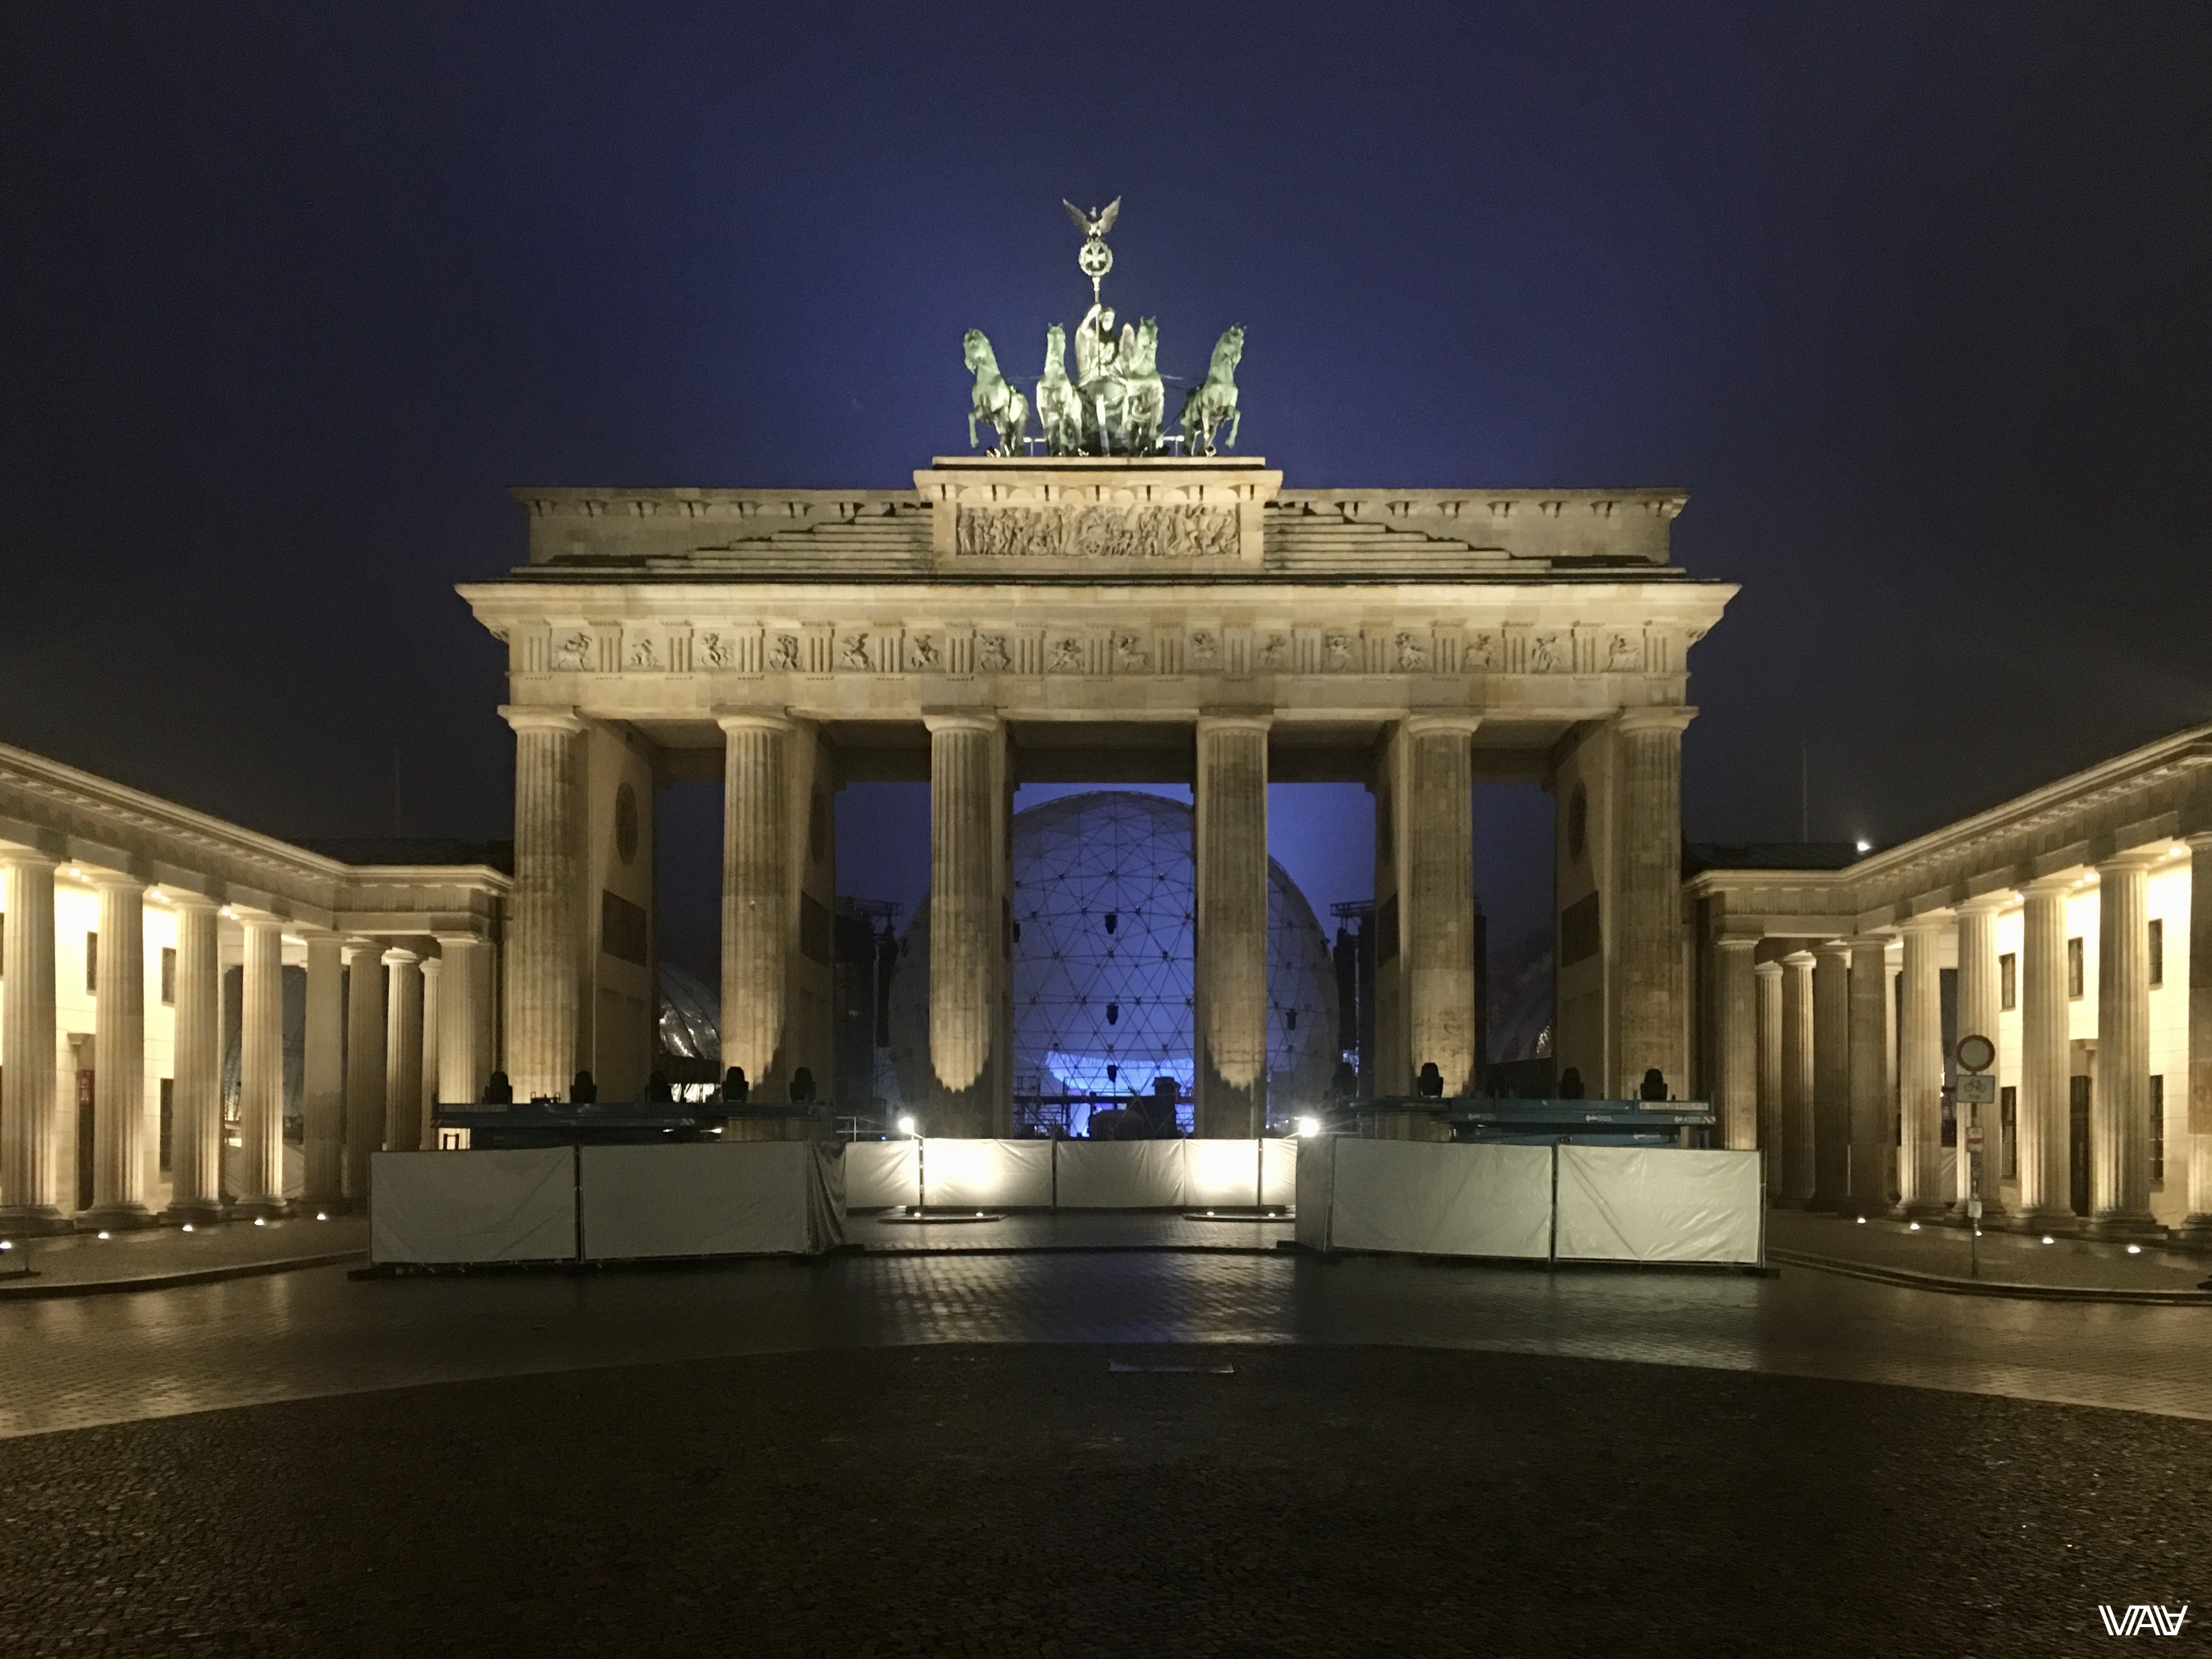 The Brandenburg Gates looks even more magnificent at night. Berlin, Germany